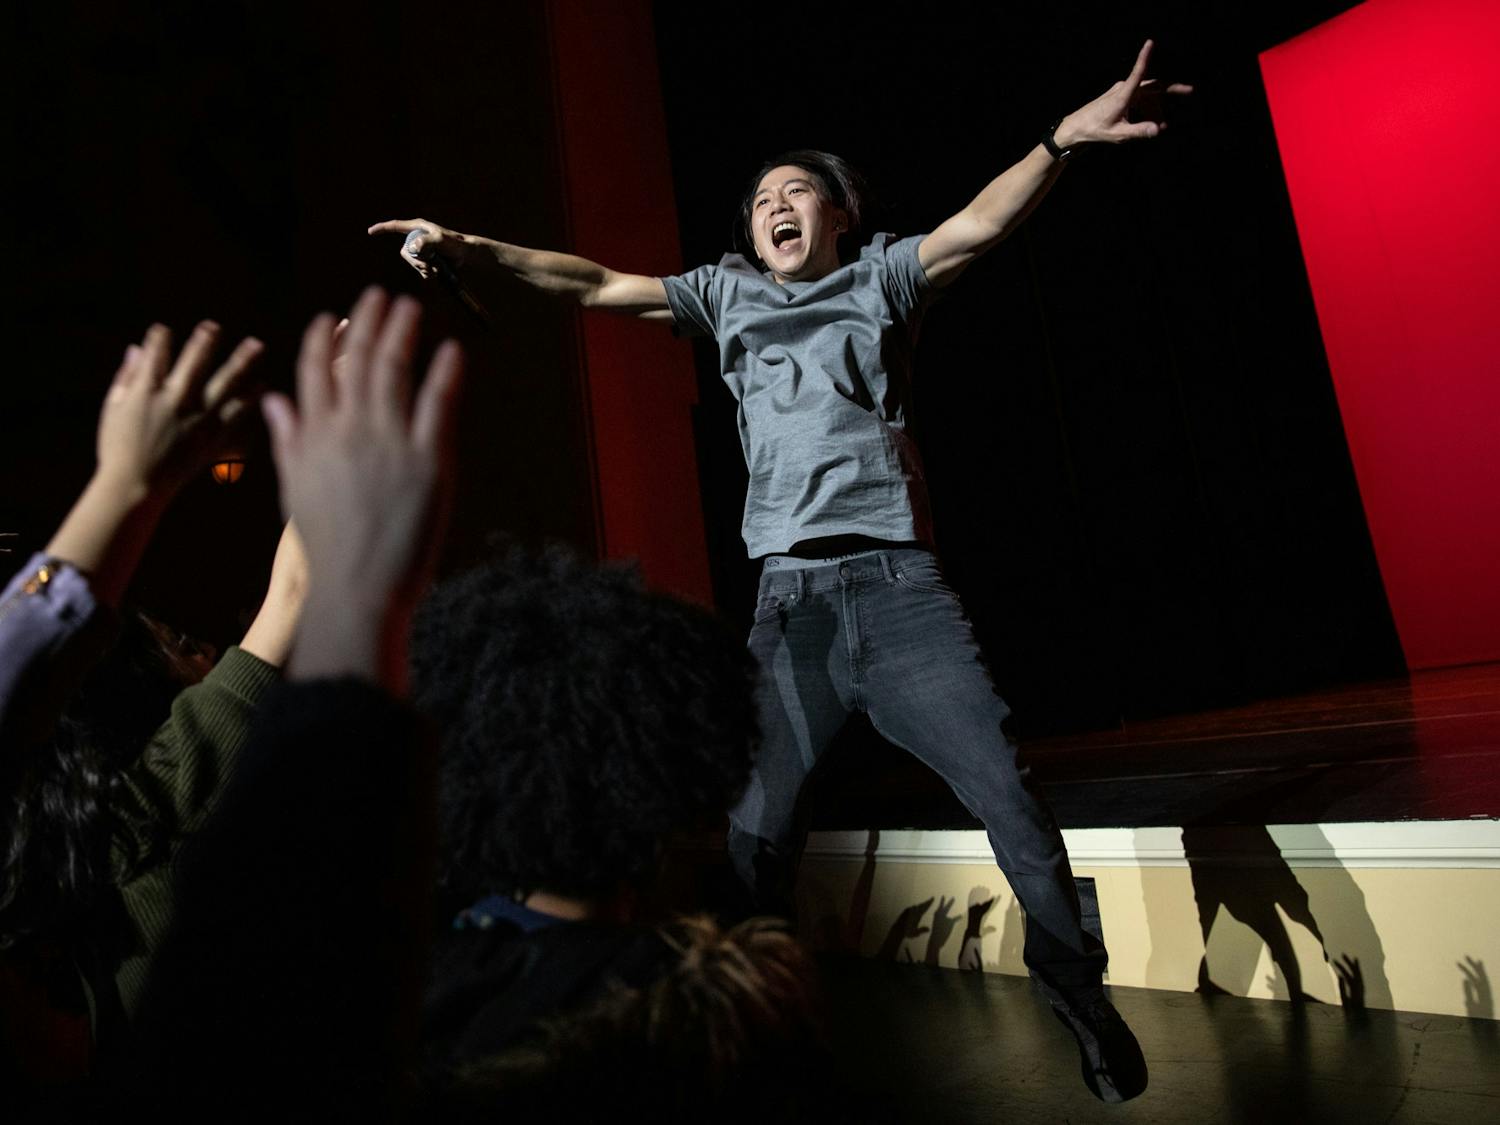 Dan Matthews, a Los Angeles-based rapper who goes by the moniker Danakadan, hypes up a crowd at Journey Into Asia at Memorial Hall on Feb. 29, 2020. Matthews performed songs that spoke to his Asian American identity as a Korean adoptee.